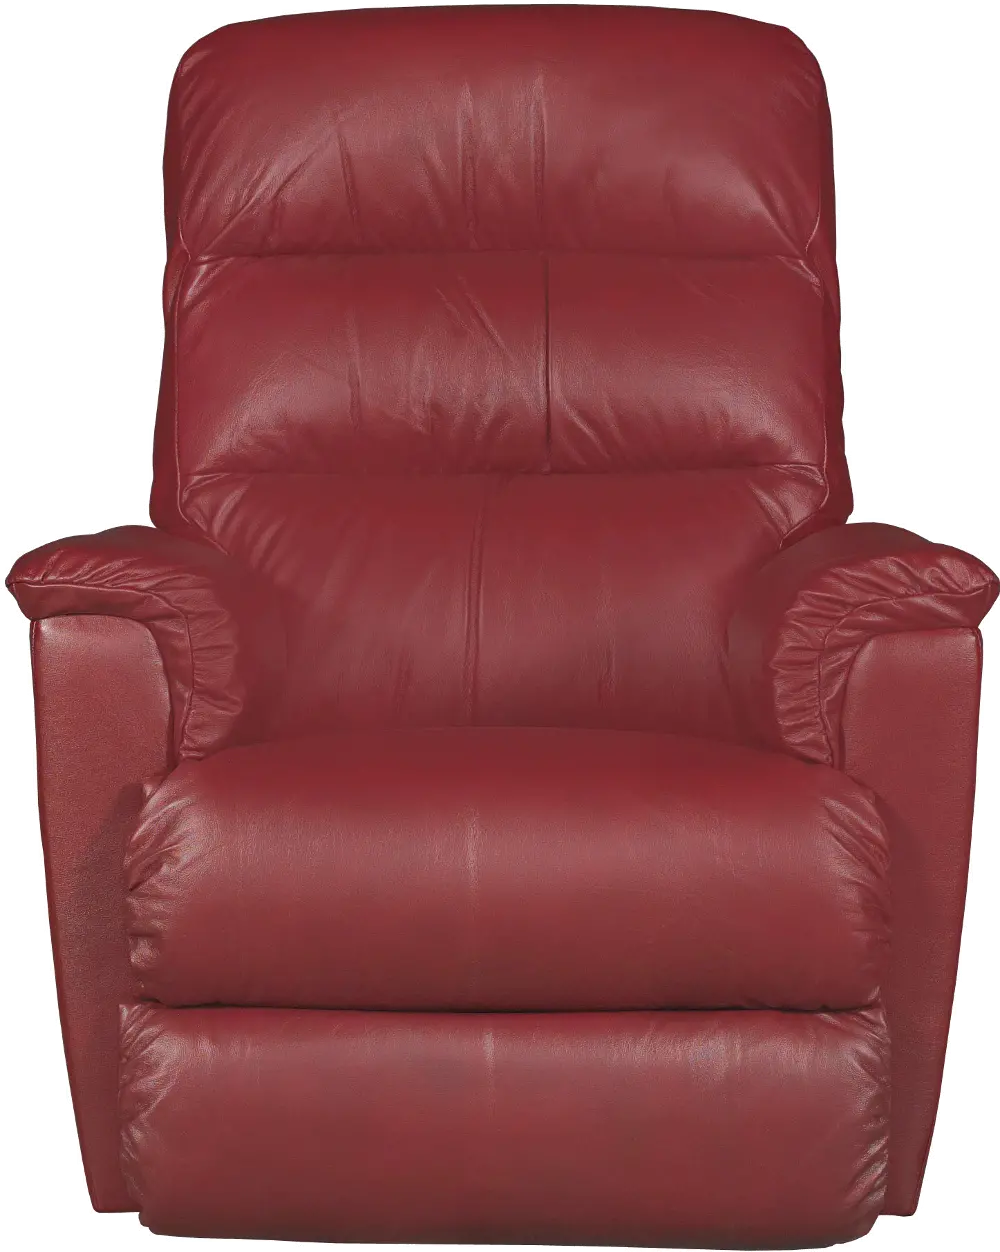 1HR-713/LB143507 Cherry Red Leather-Match Power Recliner - Tripoli-1